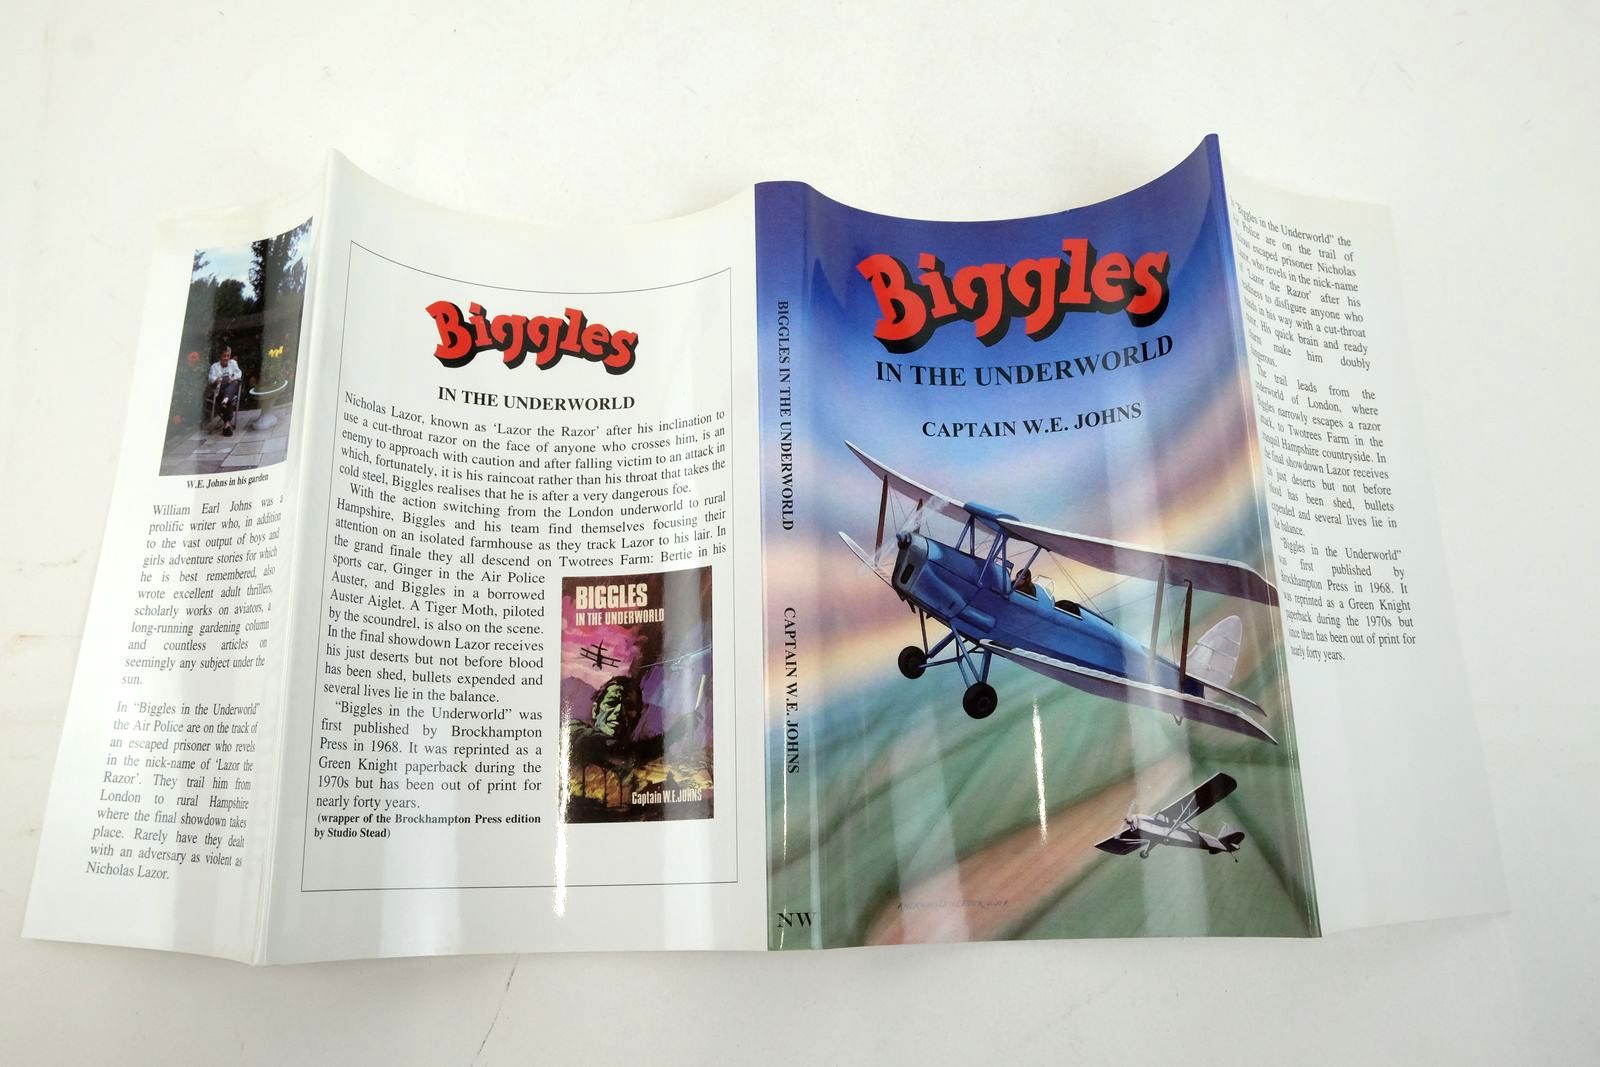 Photo of BIGGLES IN THE UNDERWORLD written by Johns, W.E. illustrated by Skilleter, Andrew published by Norman Wright (STOCK CODE: 2138307)  for sale by Stella & Rose's Books